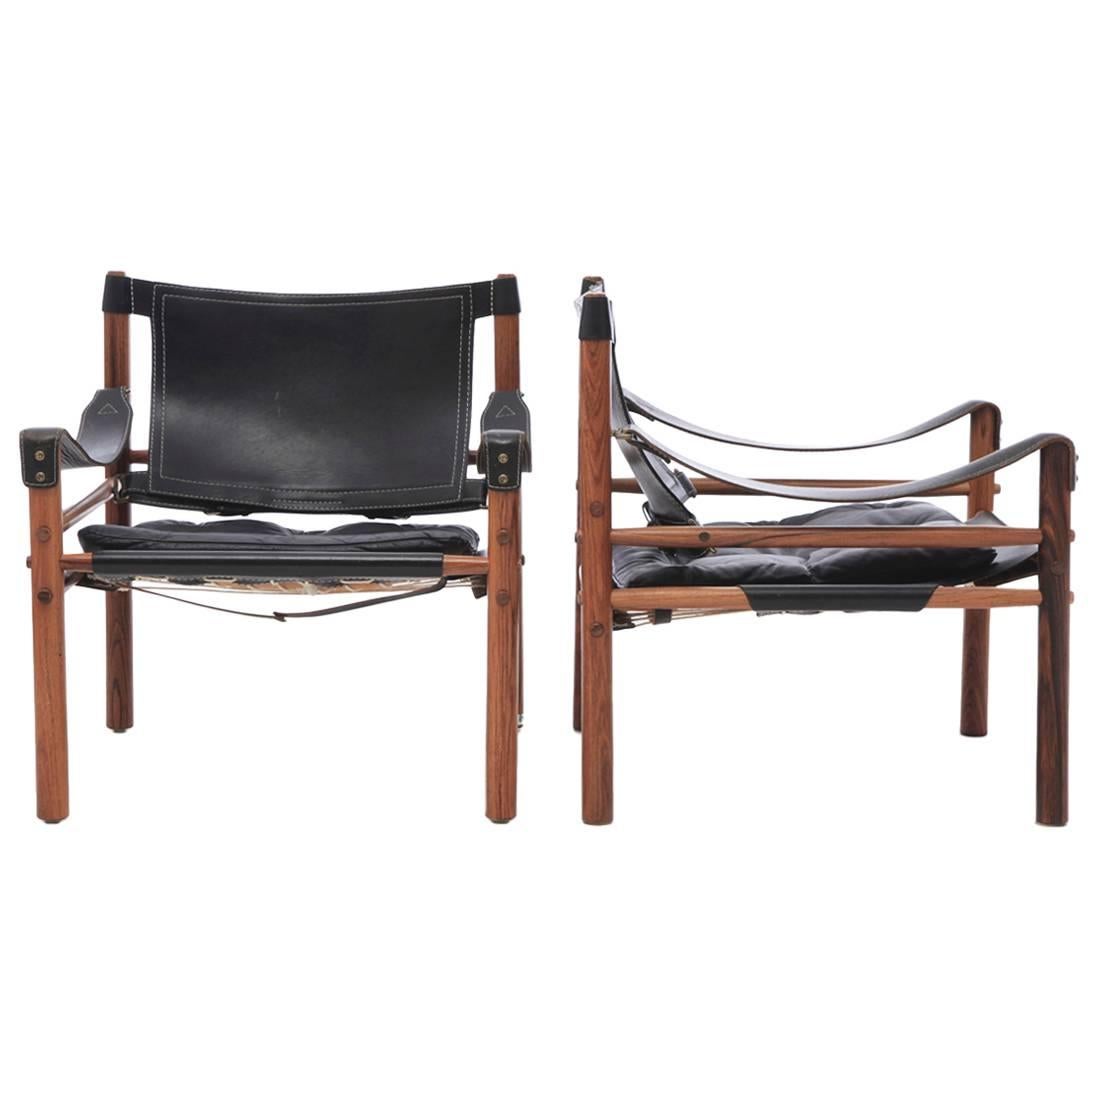 Pair of Arne Norell Safari "Sirocco" Chairs, 1960s, Sweden